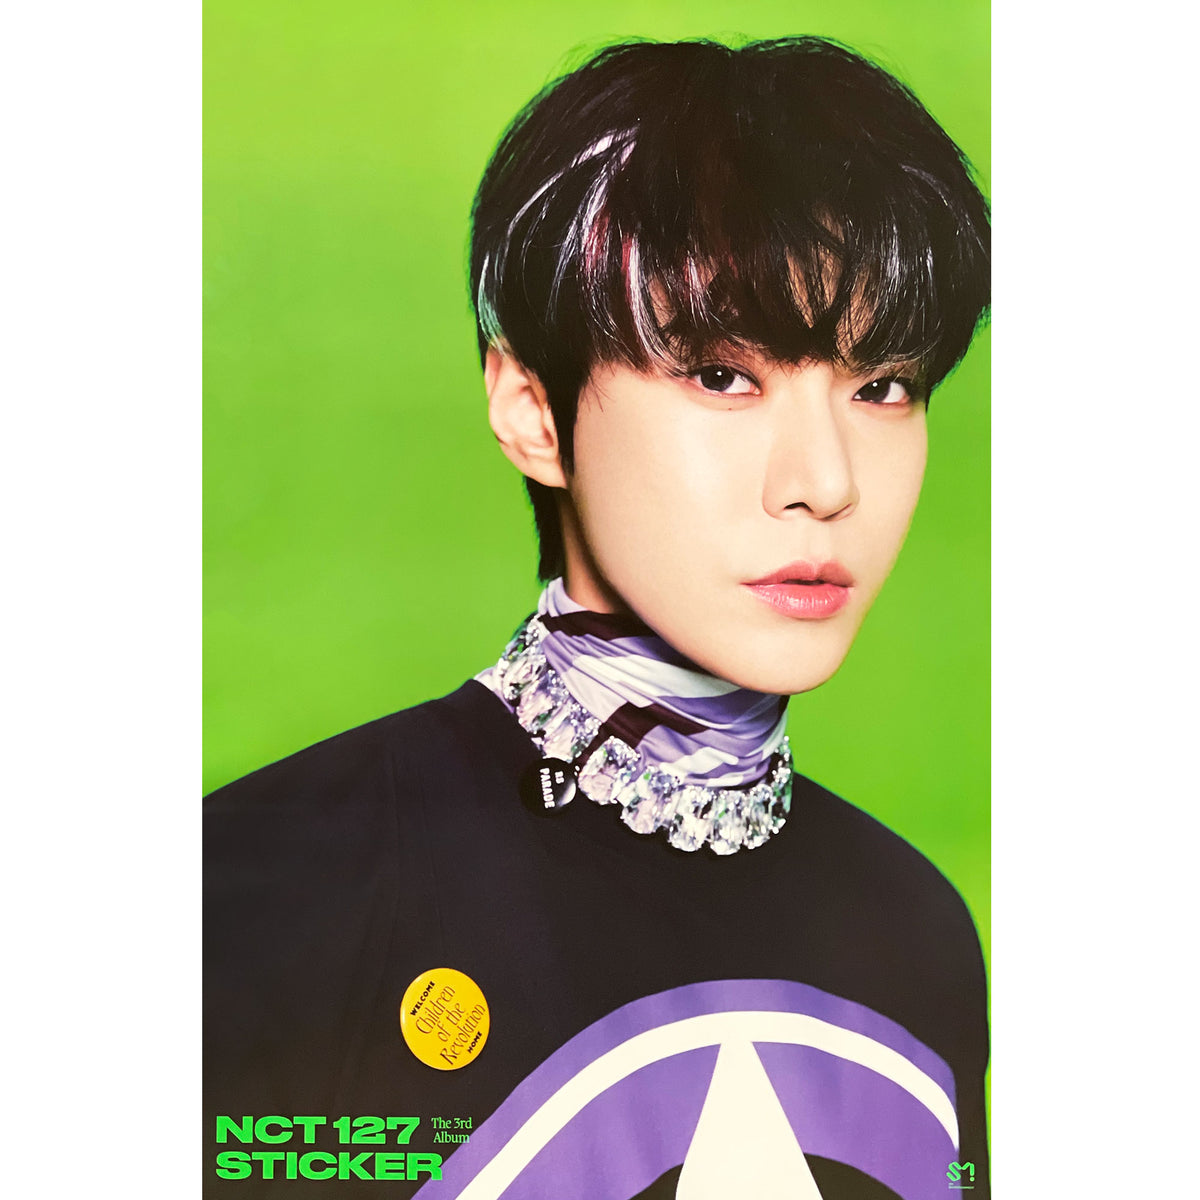 NCT 127 sticker doyoung set